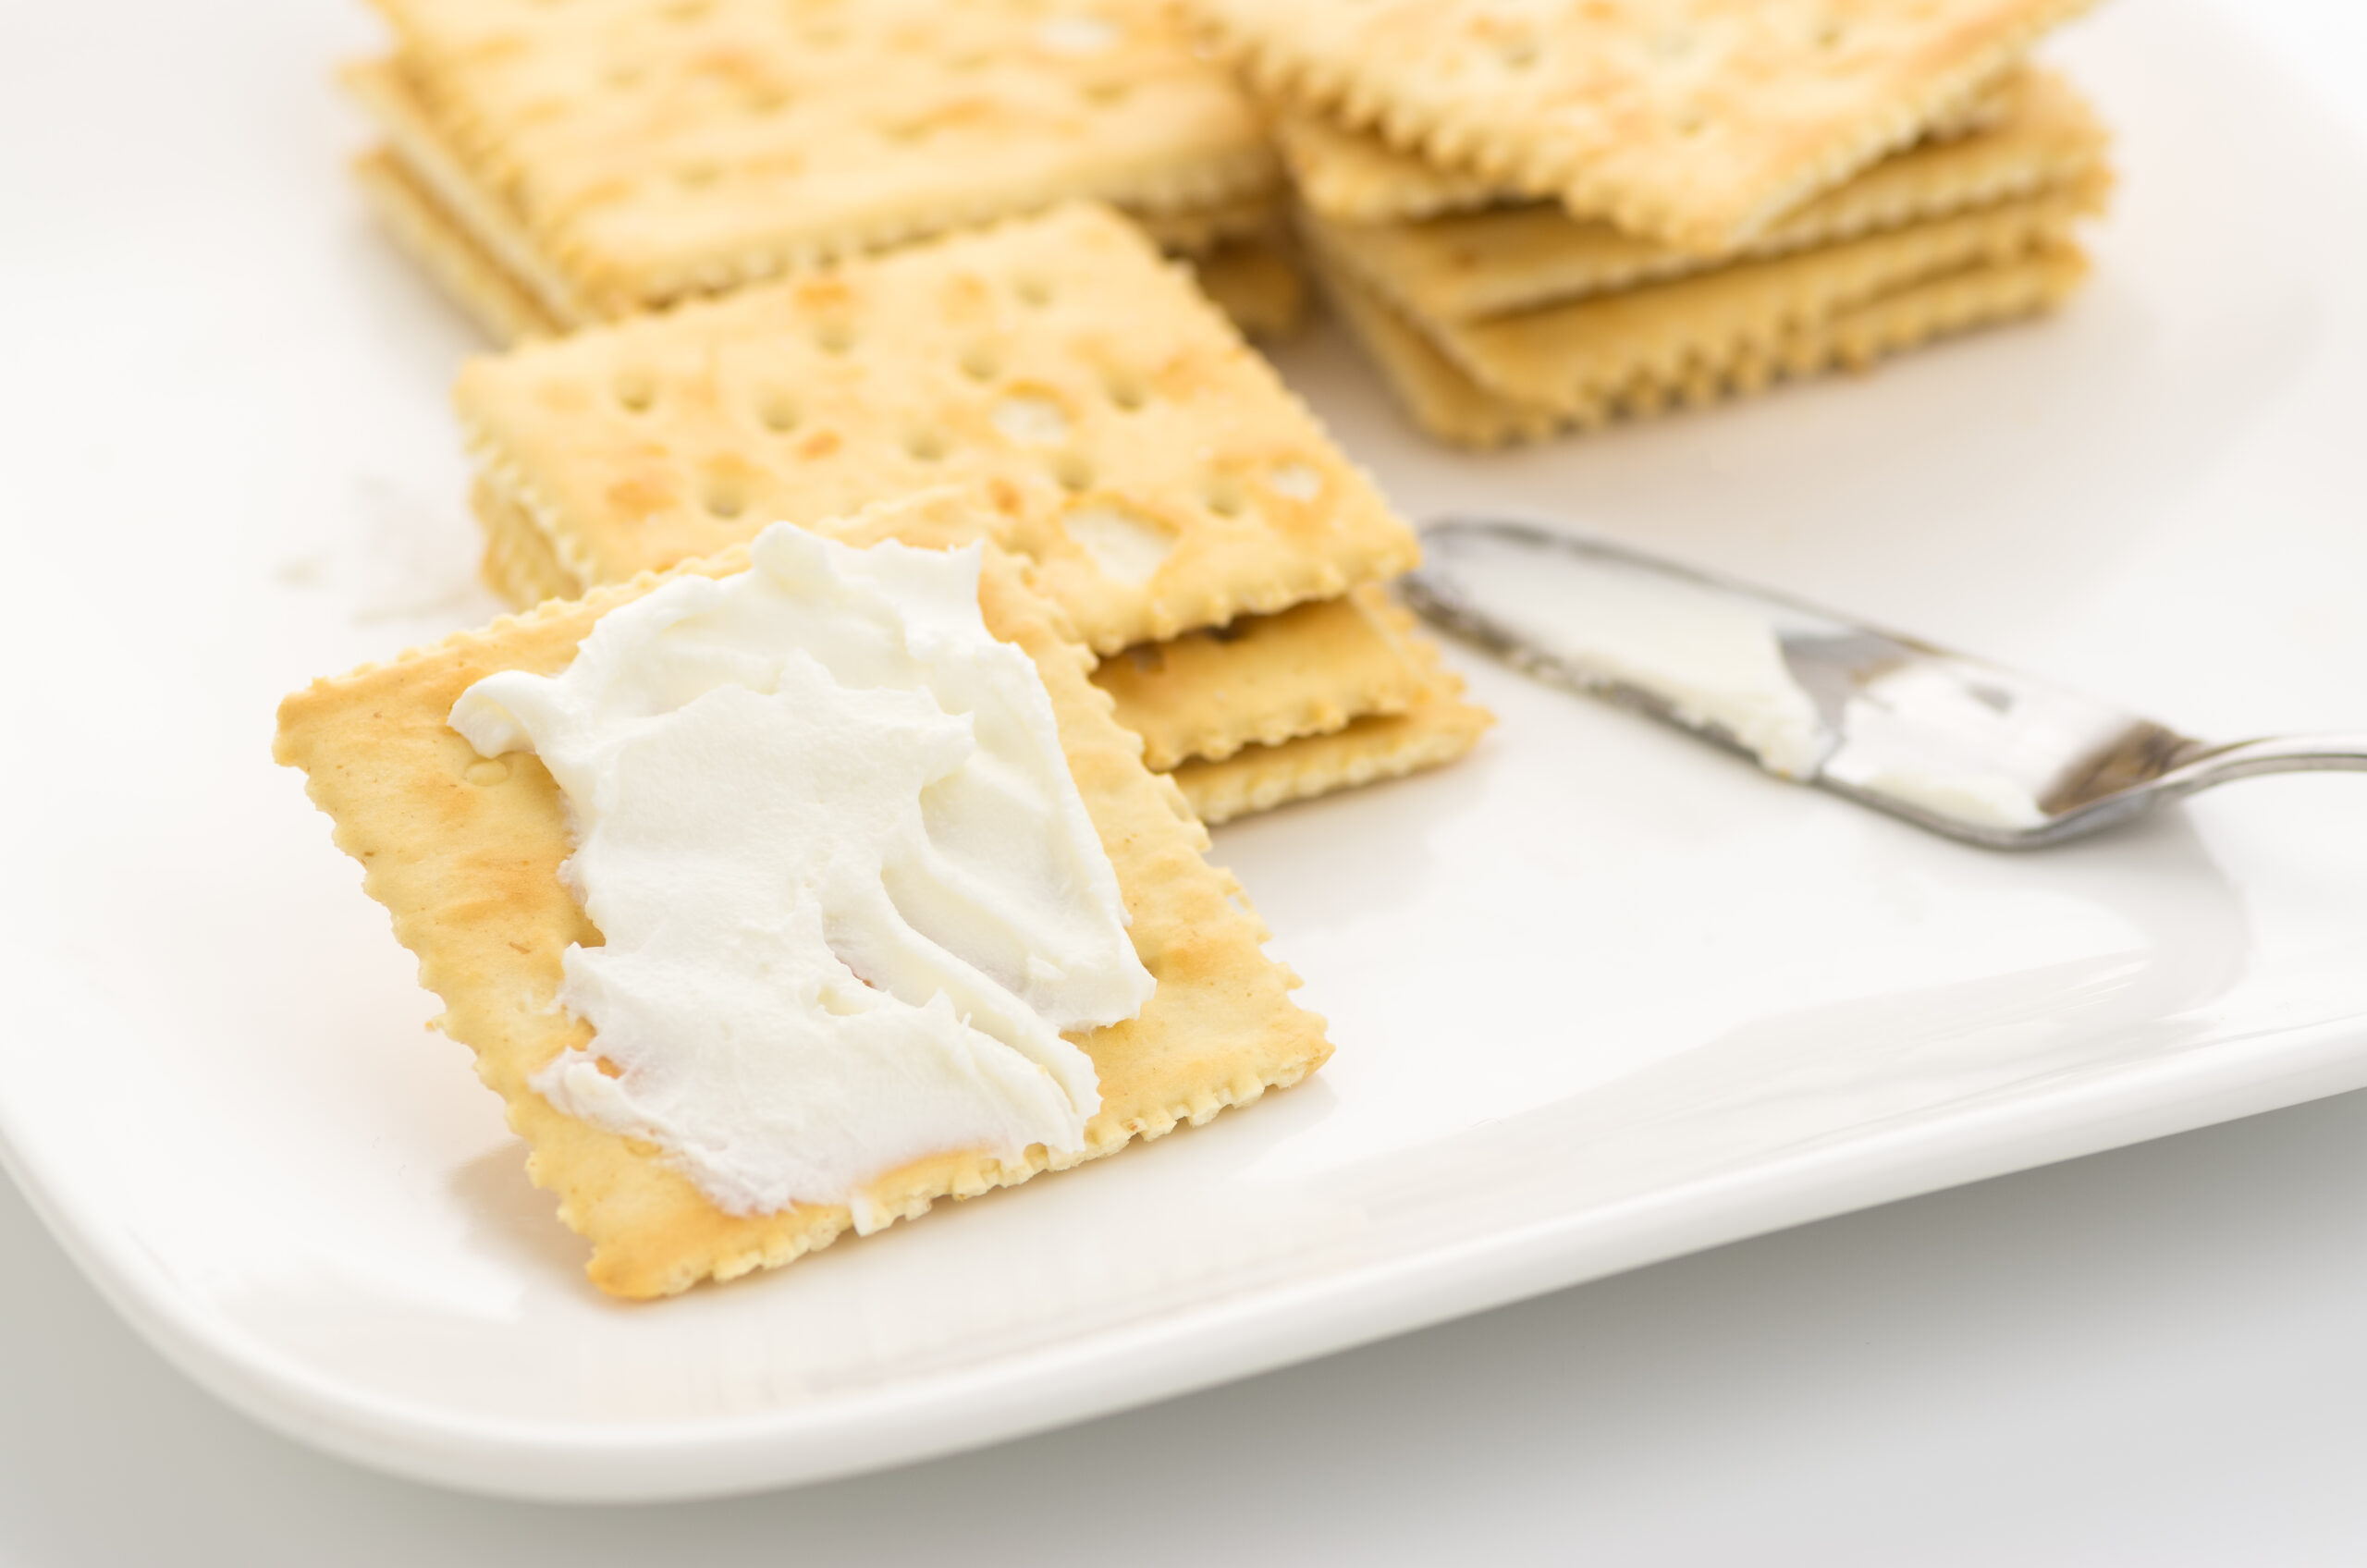 ‘Buttered Saltines’ Are The Hot Snack Trend and I’m Not Even Mad